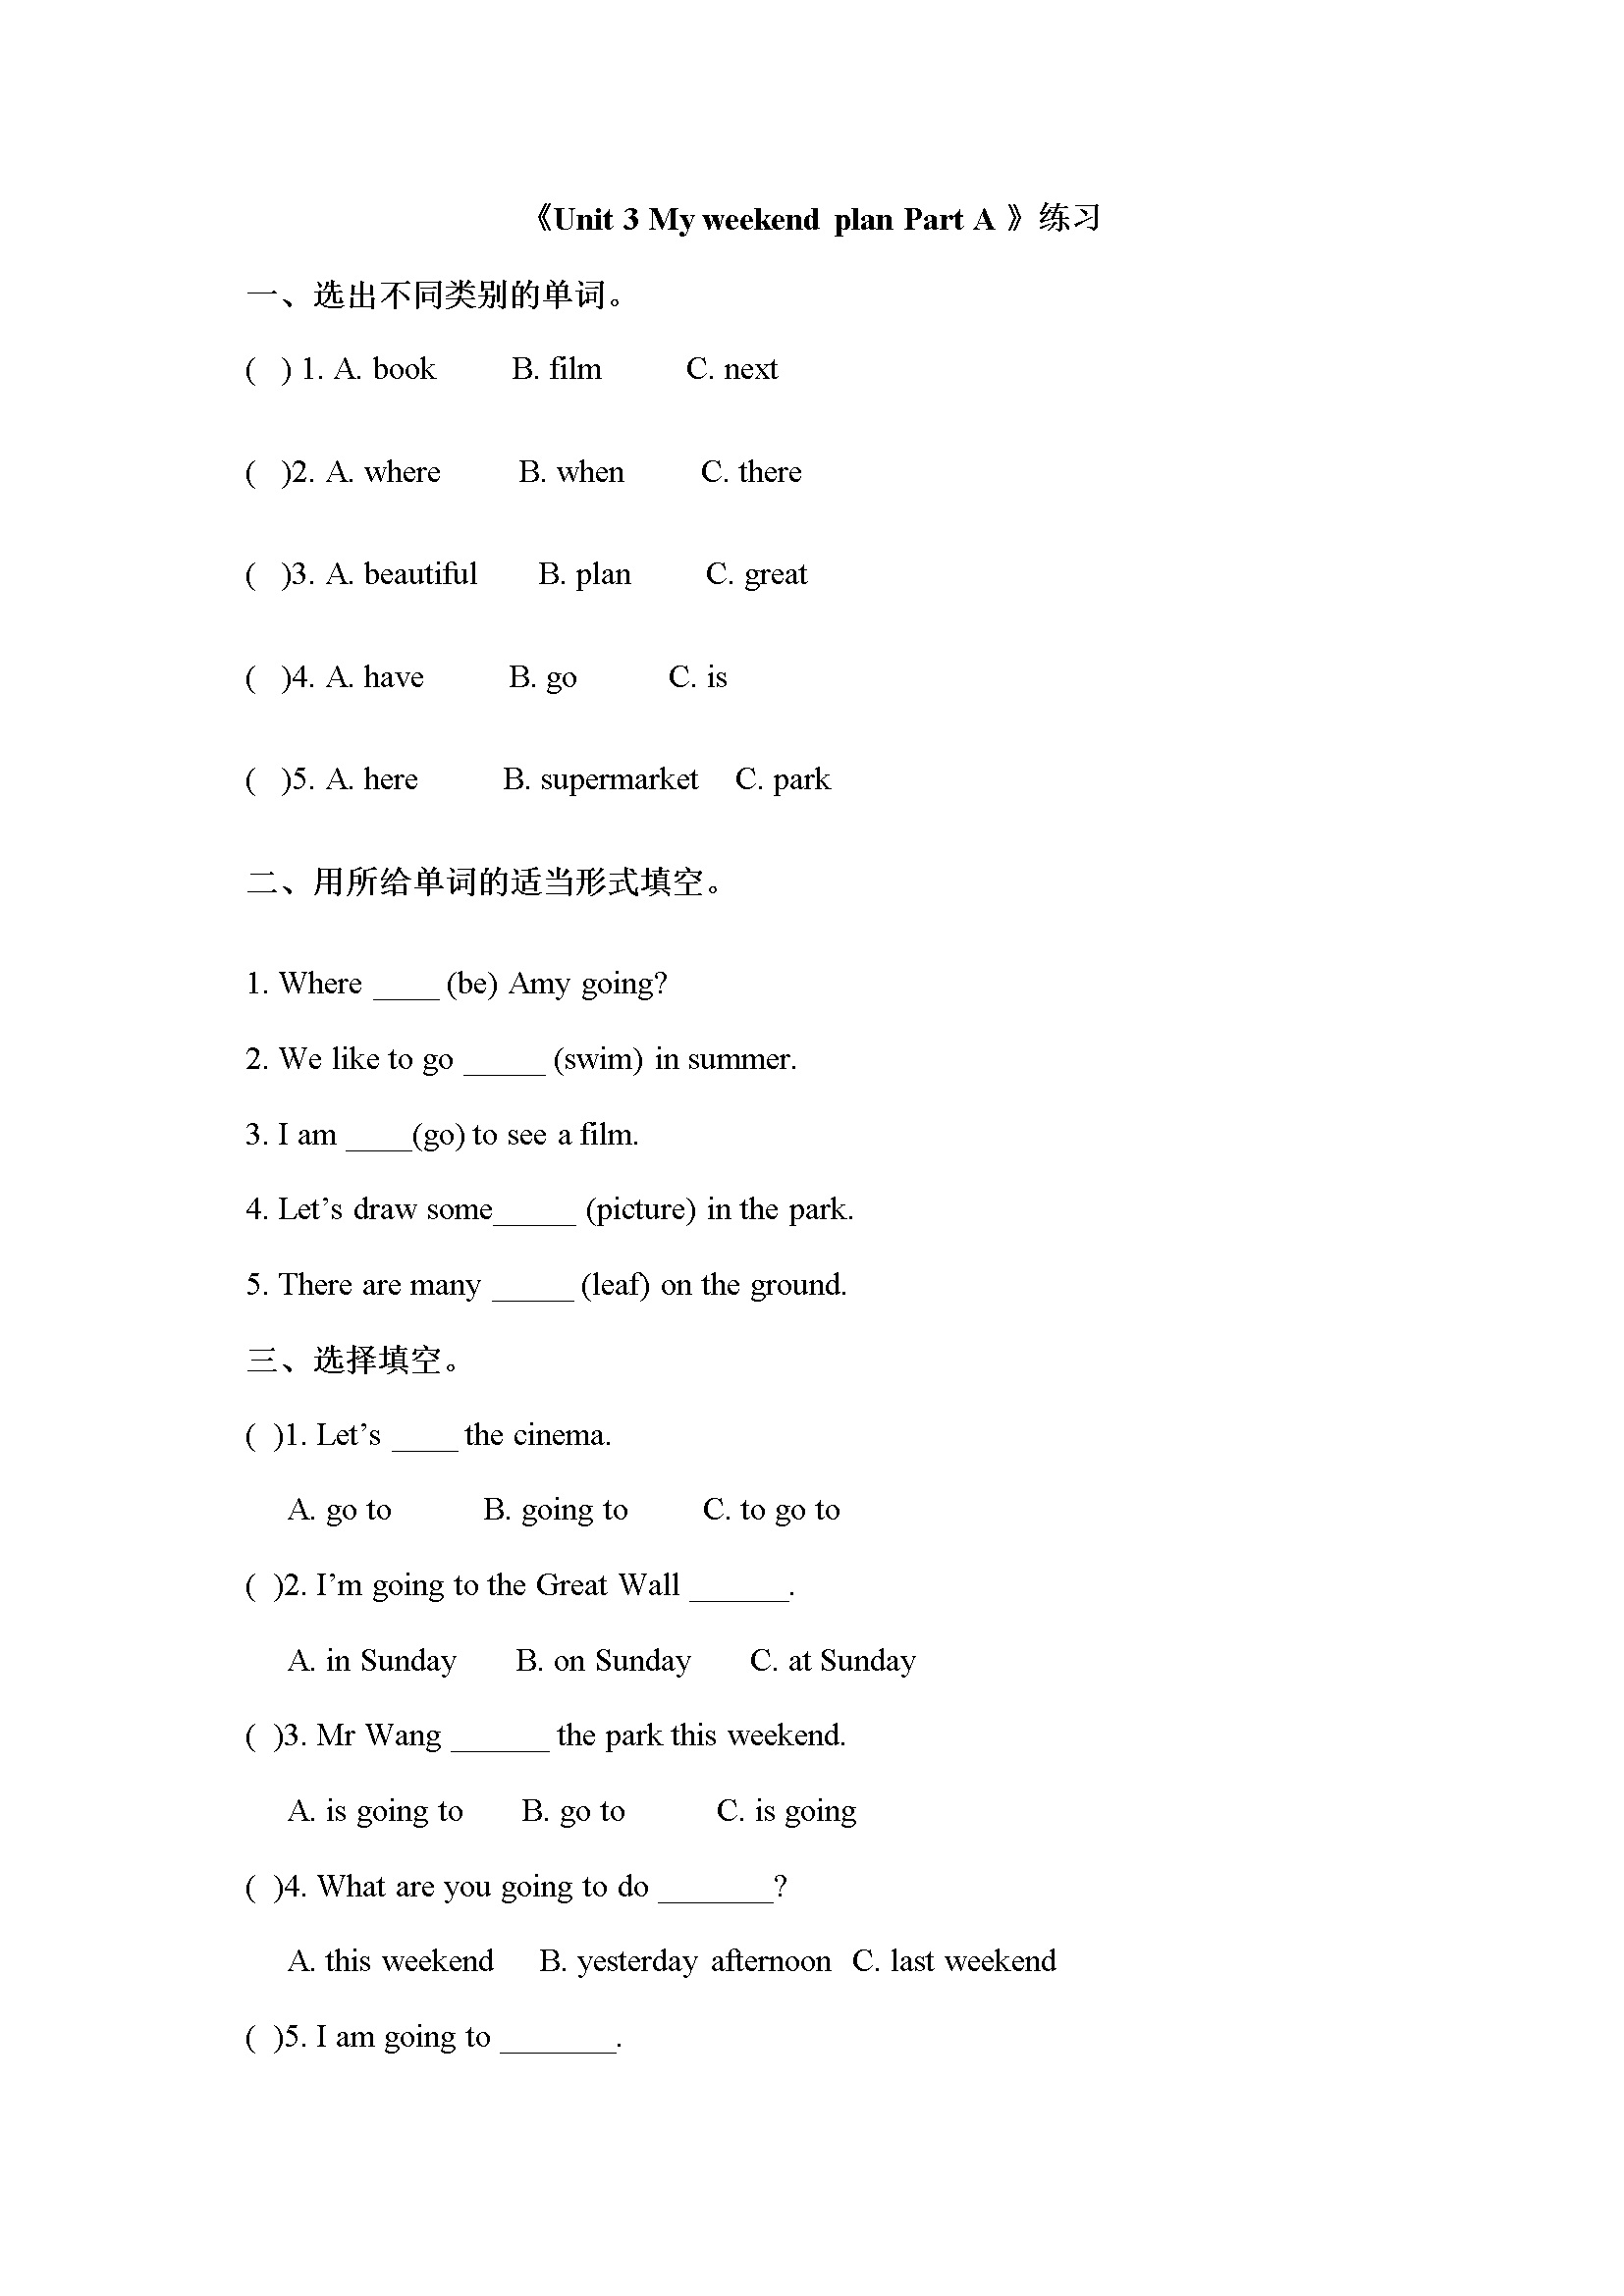 Unit 3 my weekend plan part A-人教（PEP)